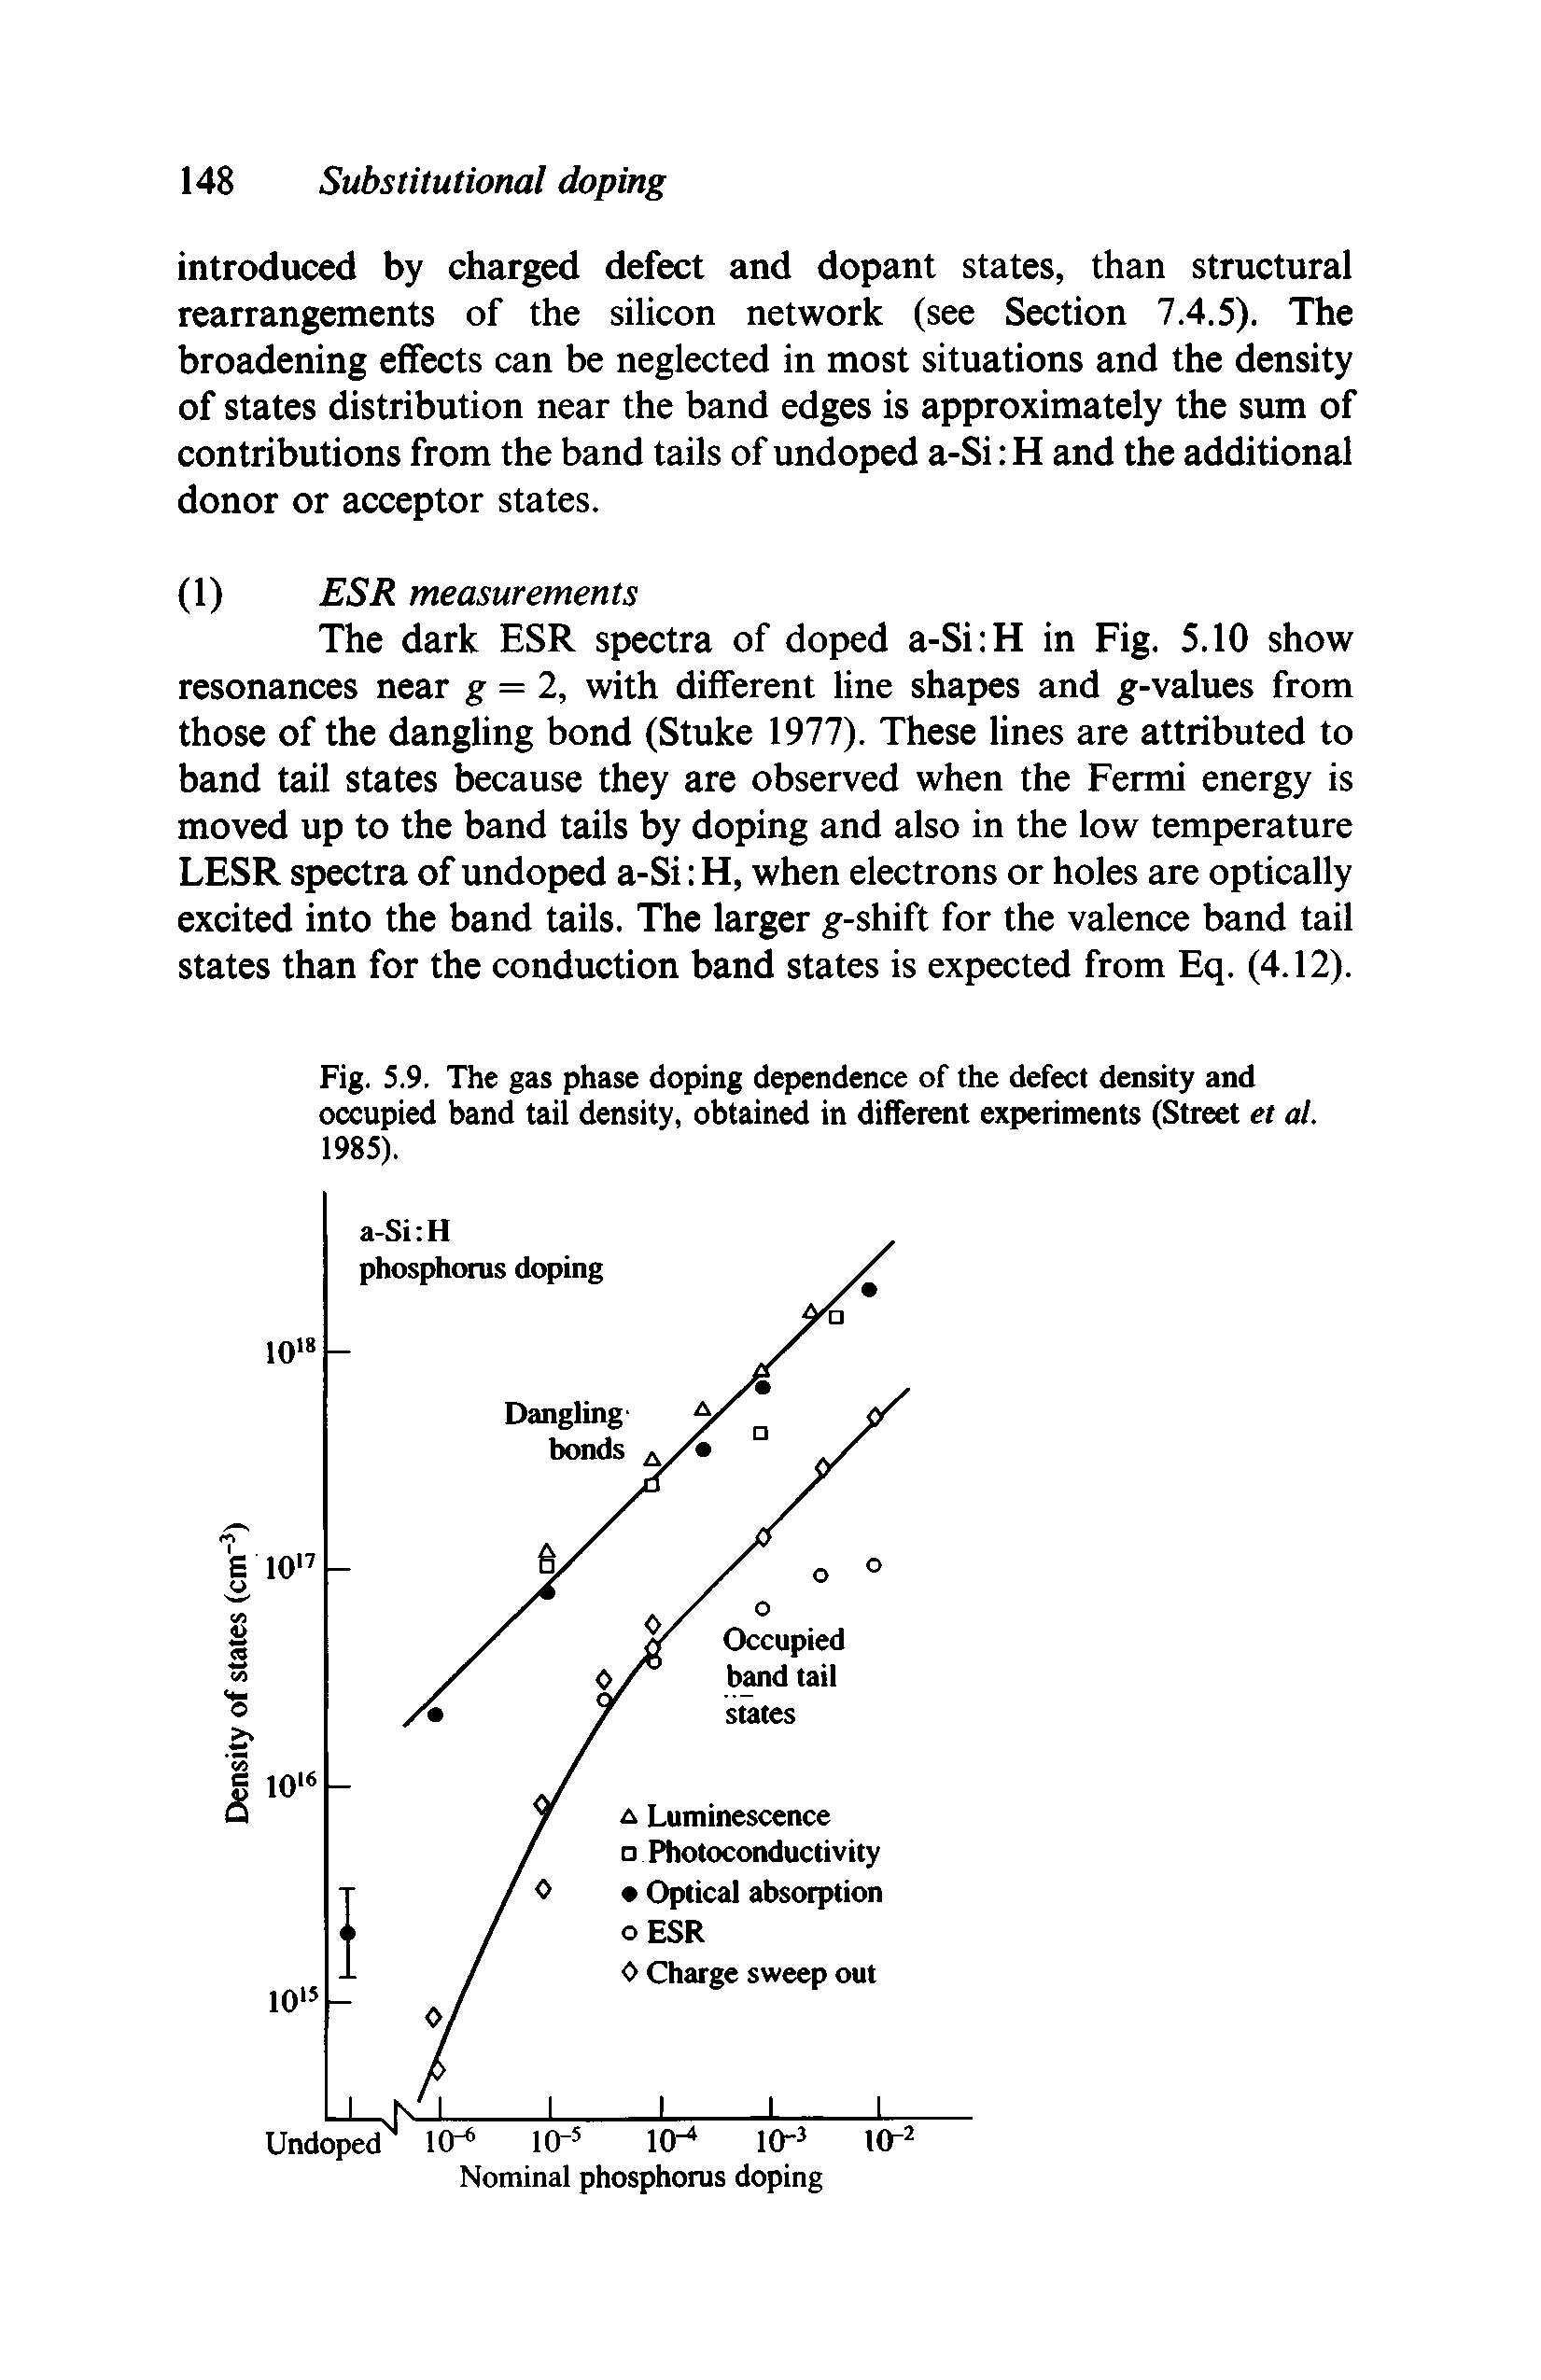 Fig. 5.9, The gas phase doping dependence of the defect density and occupied band tail density, obtained in different experiments (Street et al. 1985).